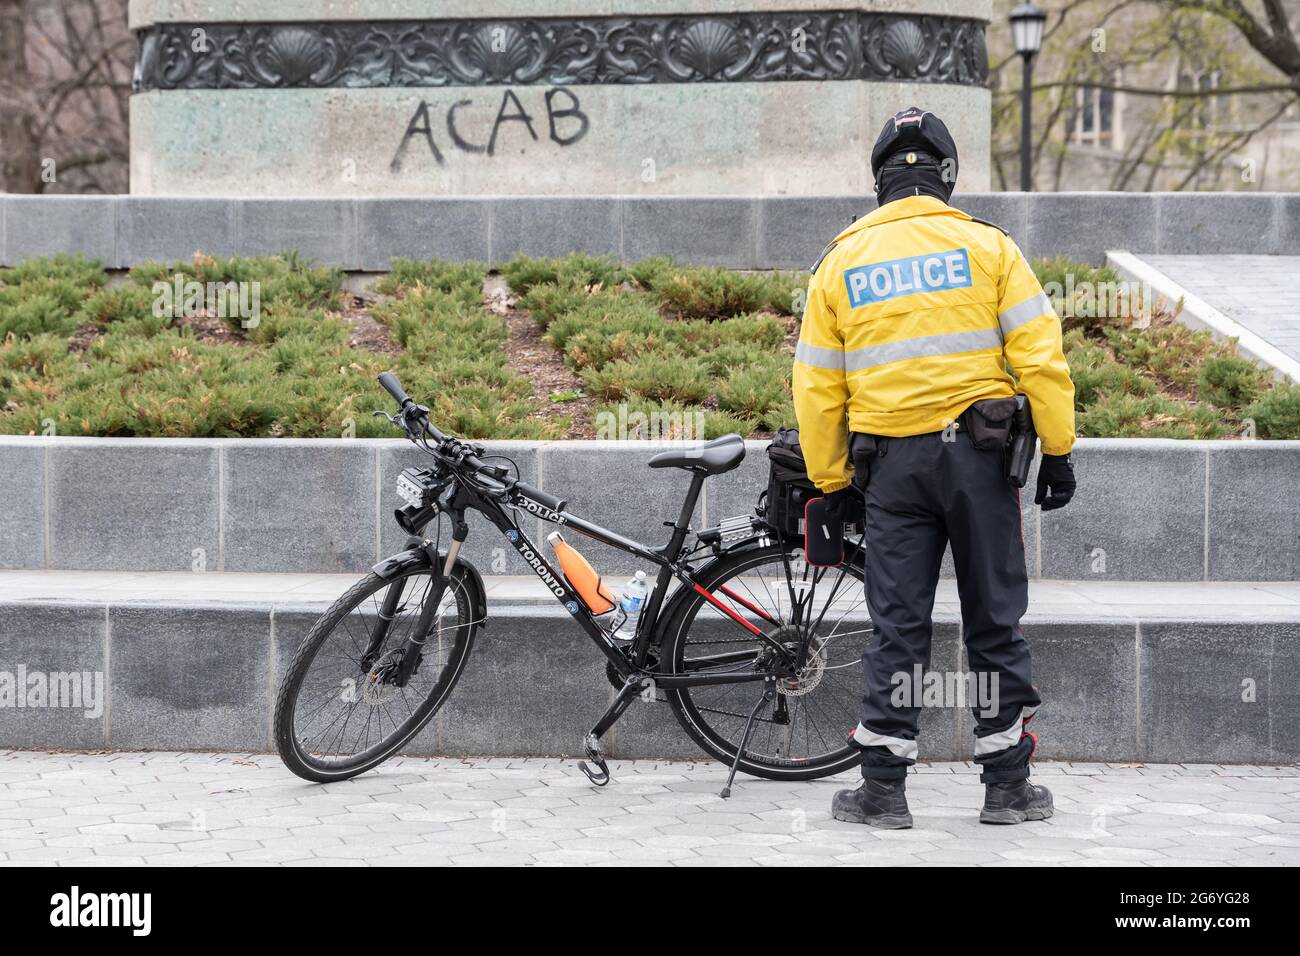 A police officer stands in front of anti-police ACAB ('All Cops Are Bastards') graffiti in Queen's Park, Toronto. Stock Photo